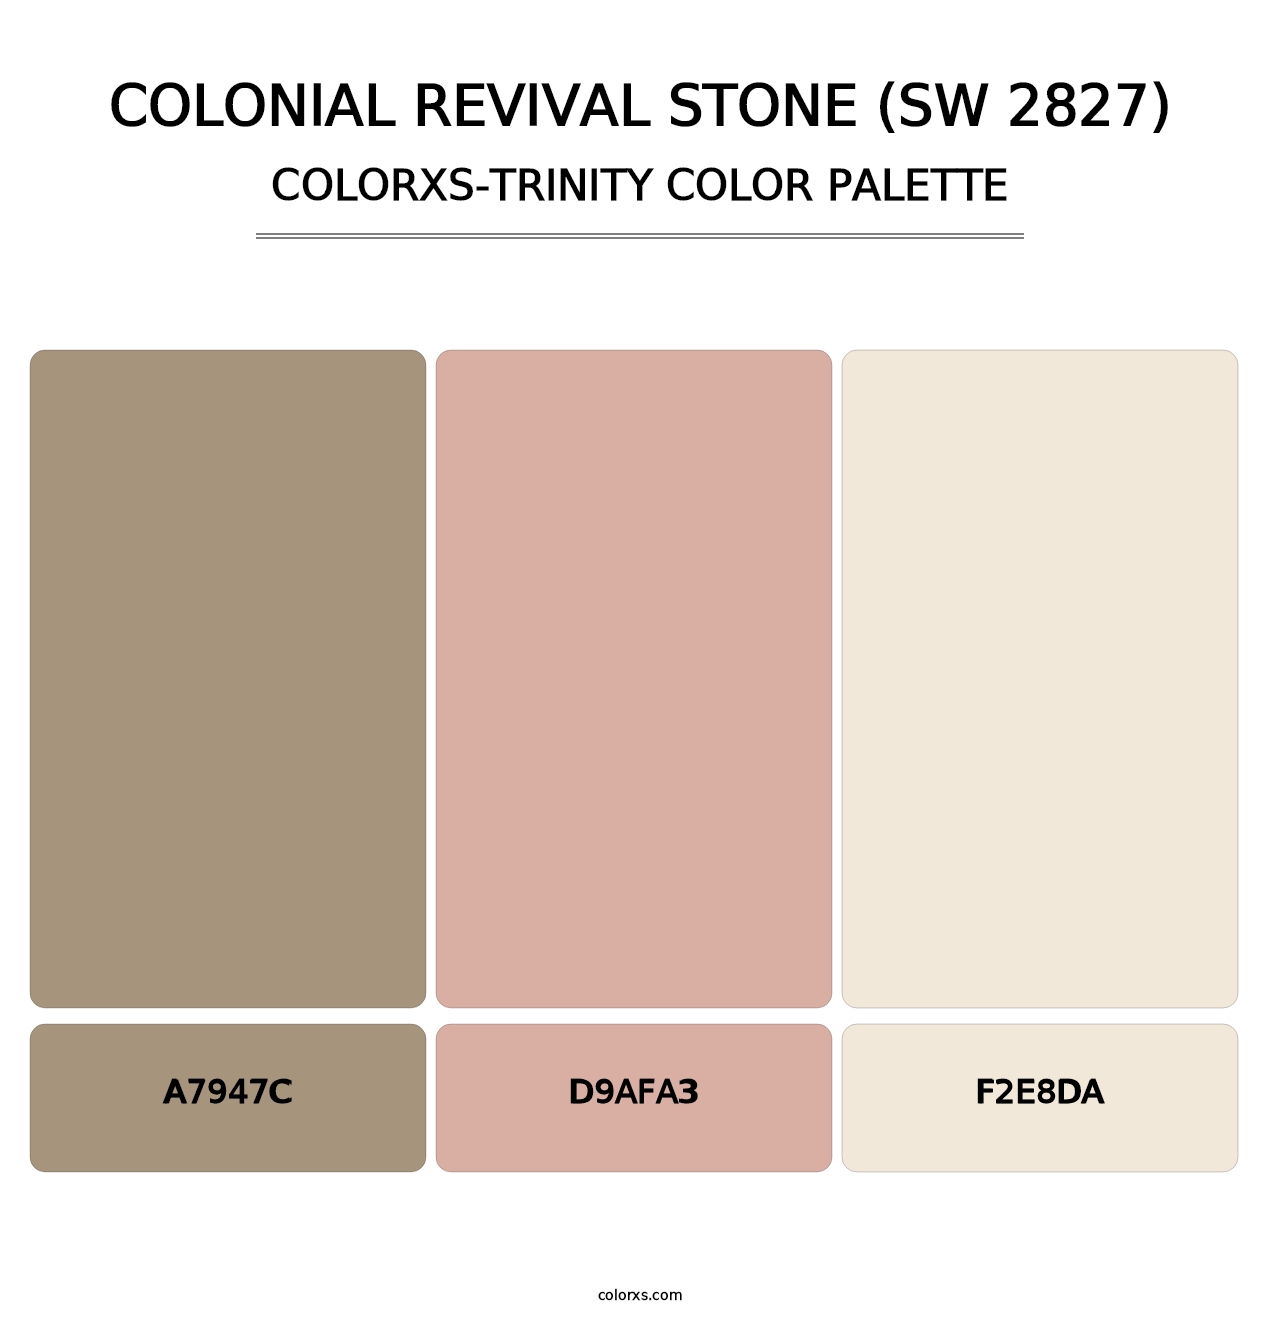 Colonial Revival Stone (SW 2827) - Colorxs Trinity Palette